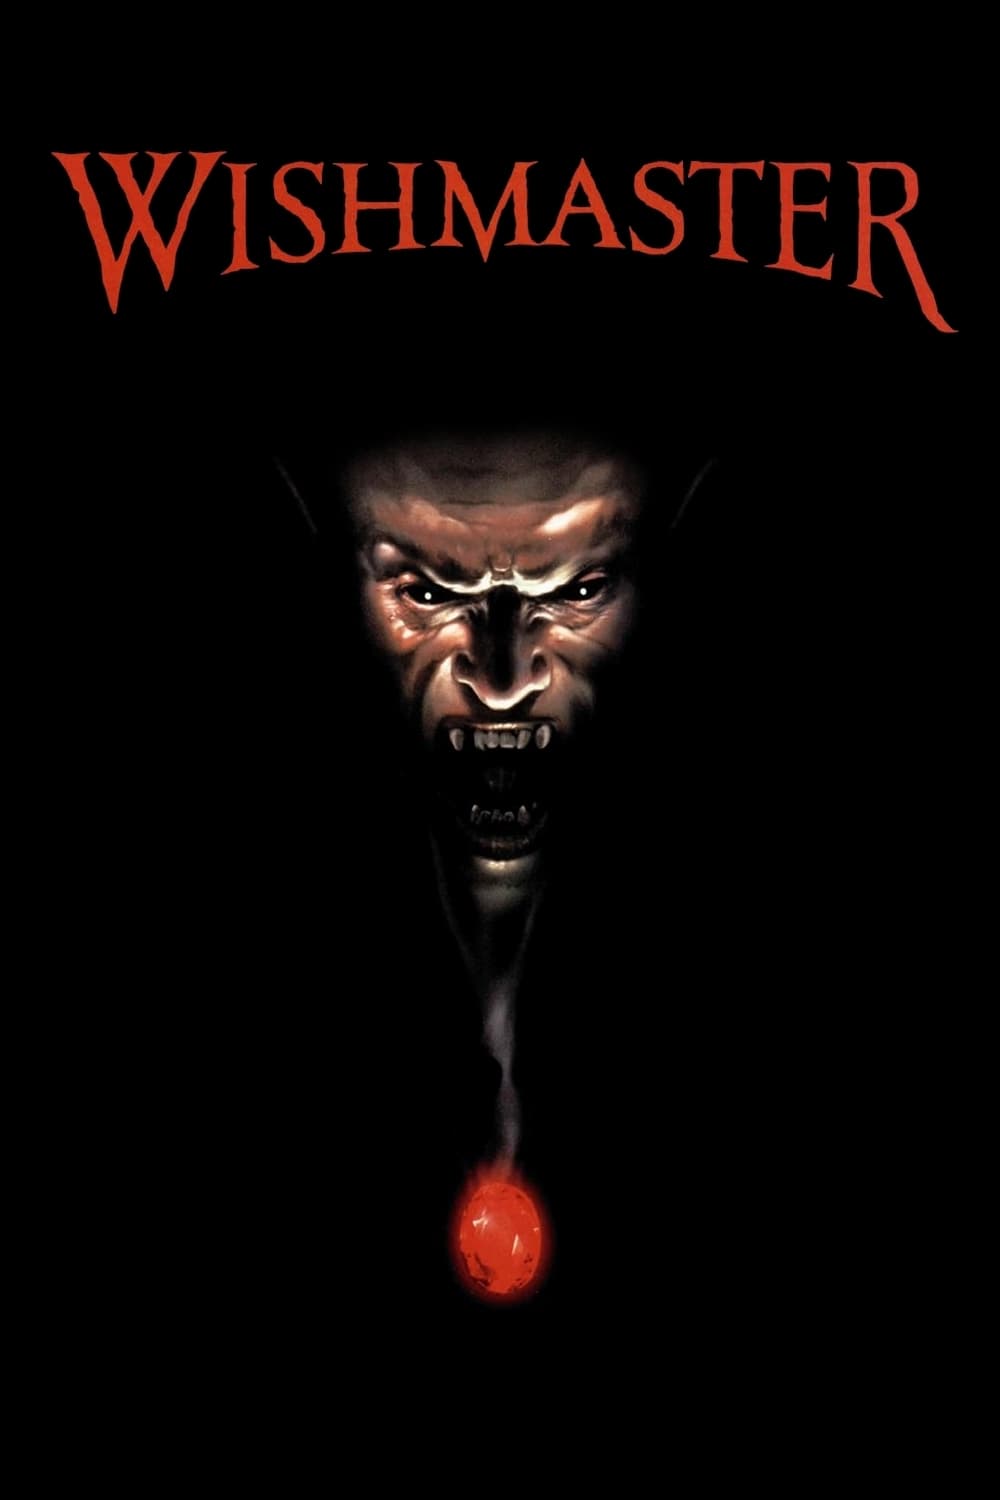 Poster for the movie "Wishmaster"